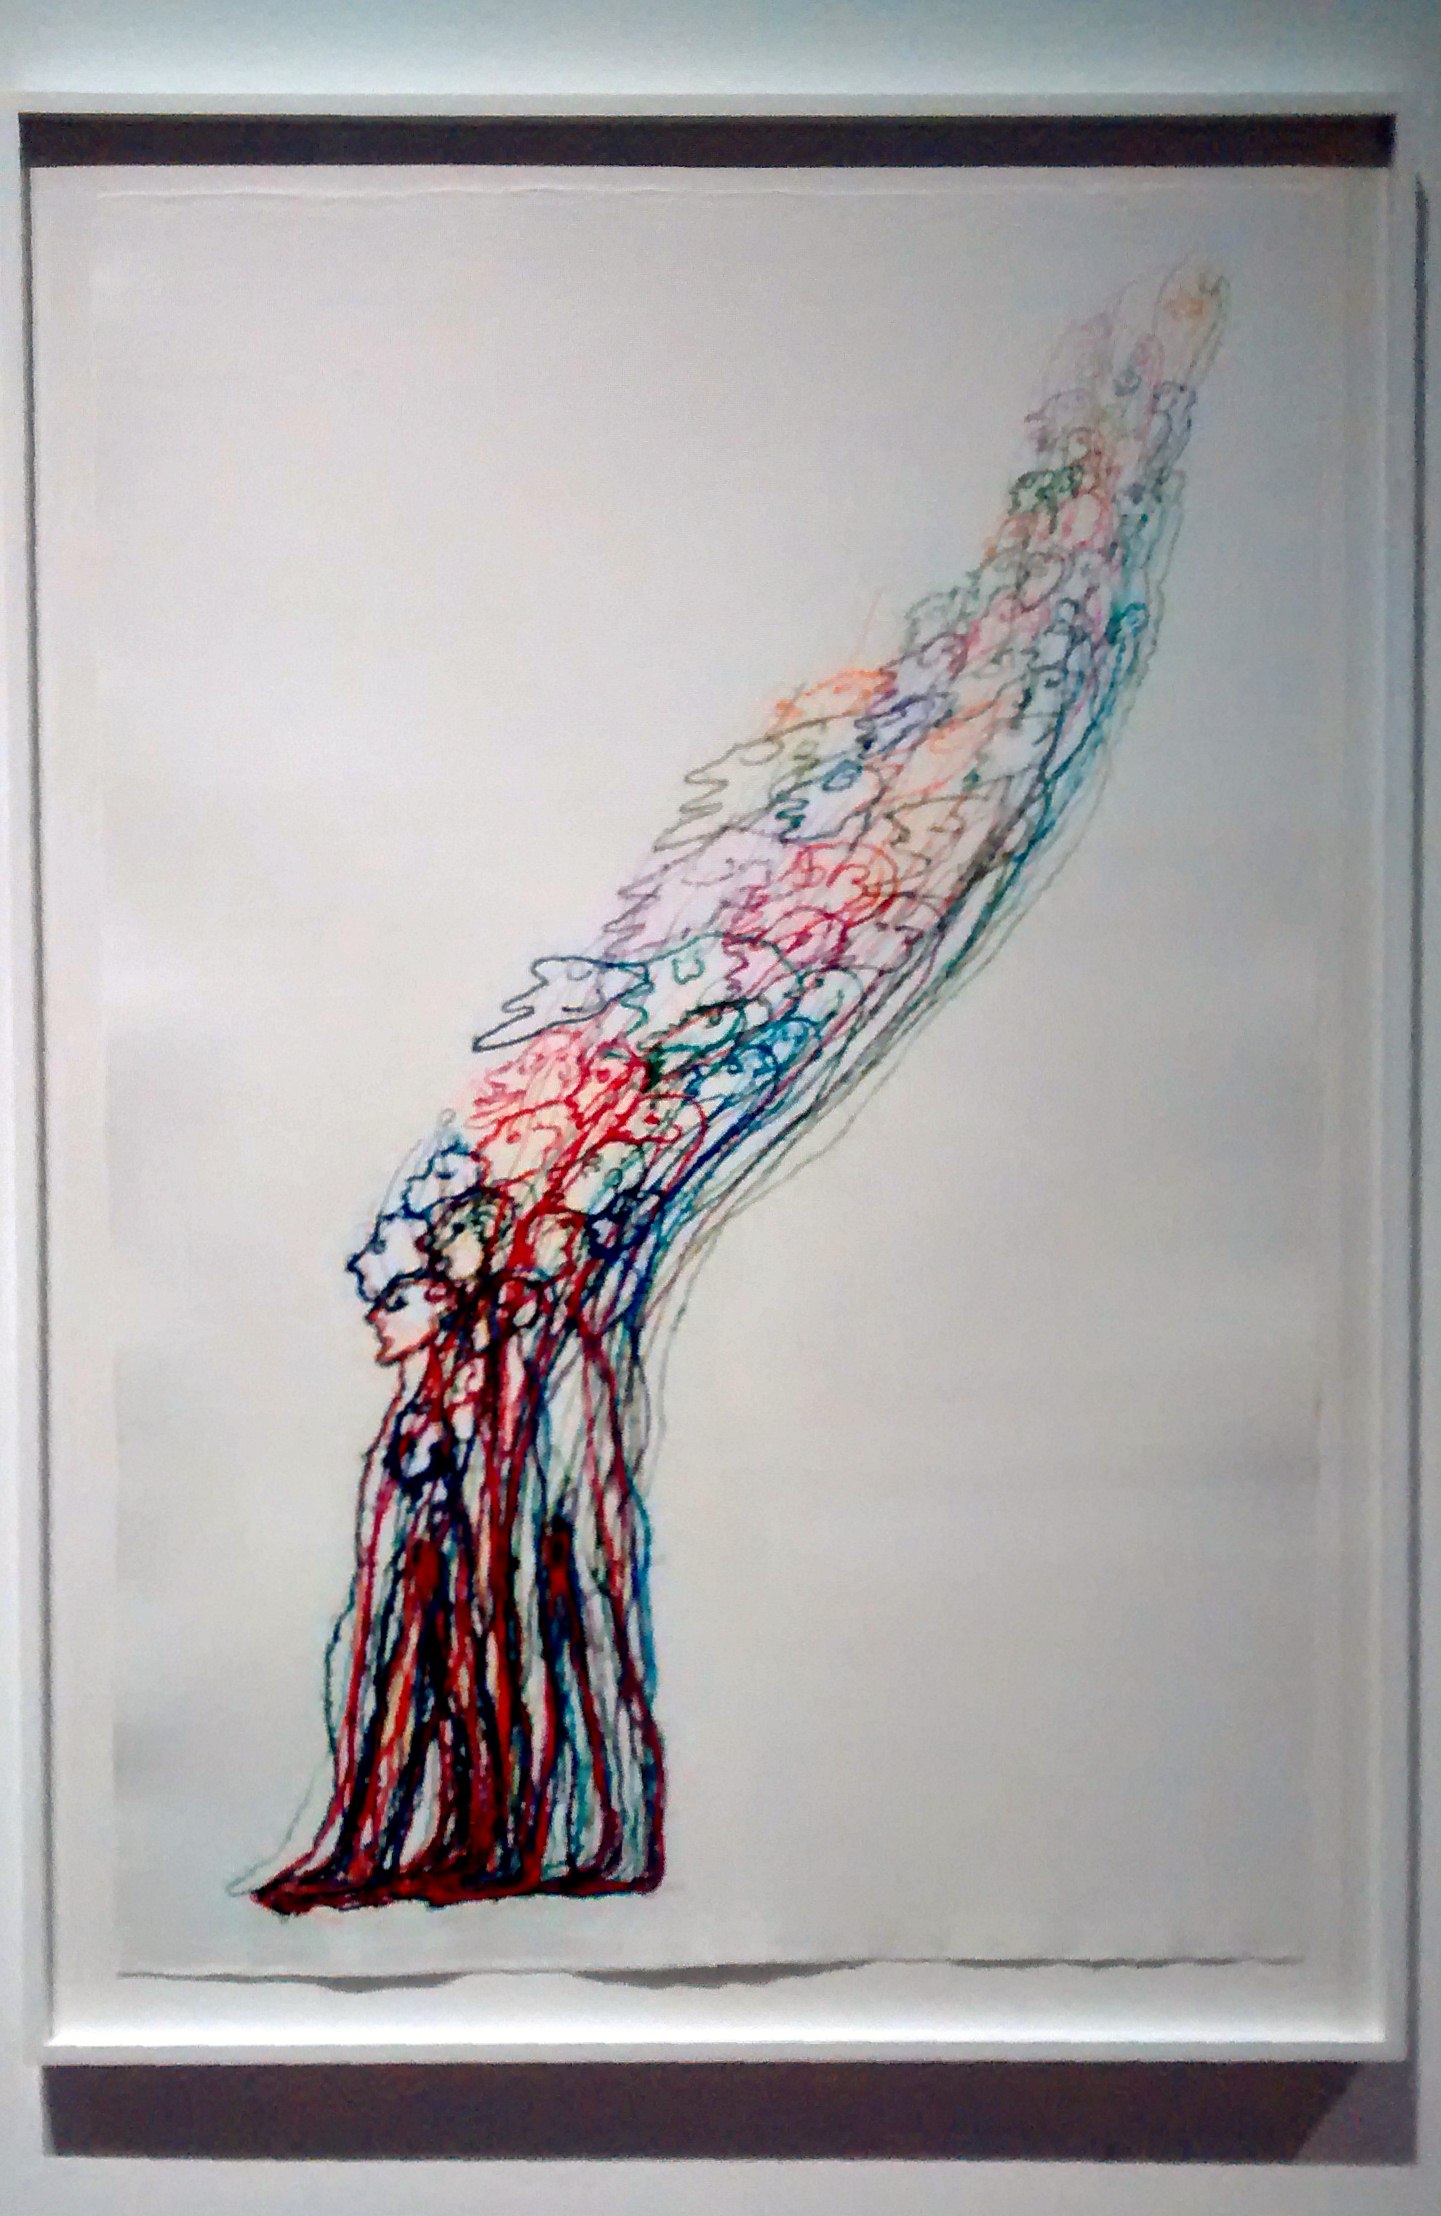 embroidery by Do Ho Suh, Whitworth Gallery, Manchester